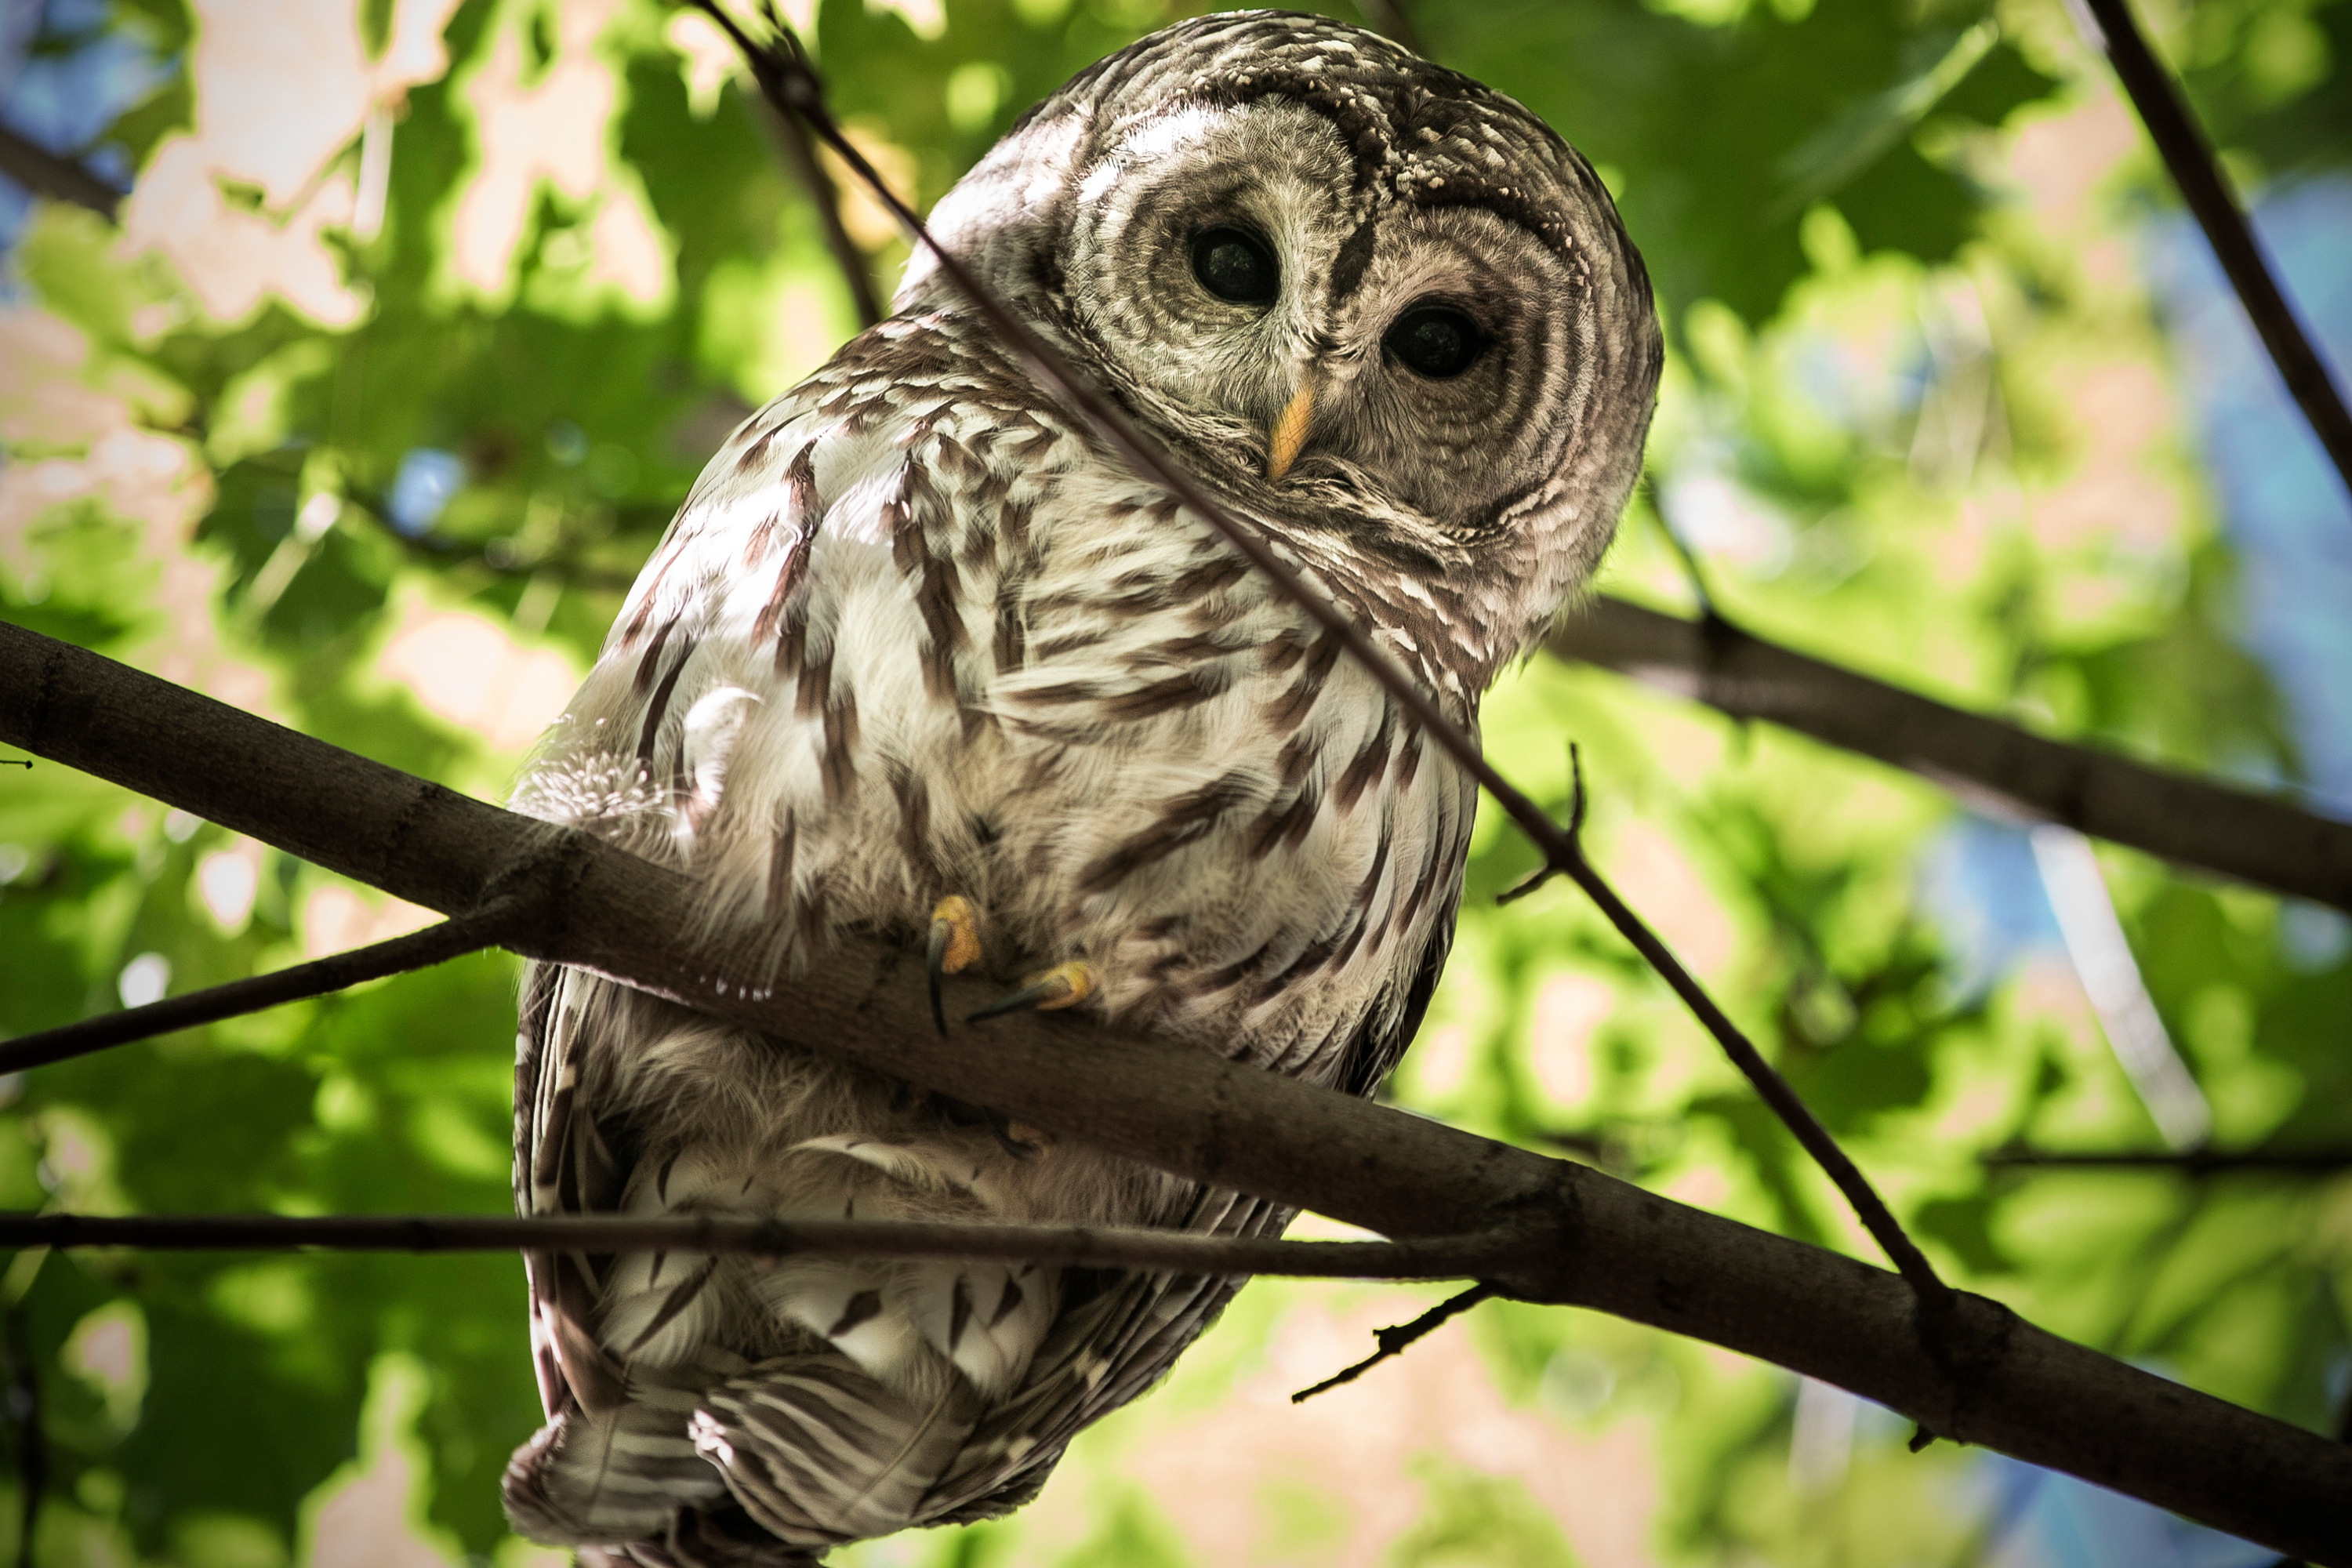 Central Park’s Barry the owl was fatally struck by a vehicle in August.